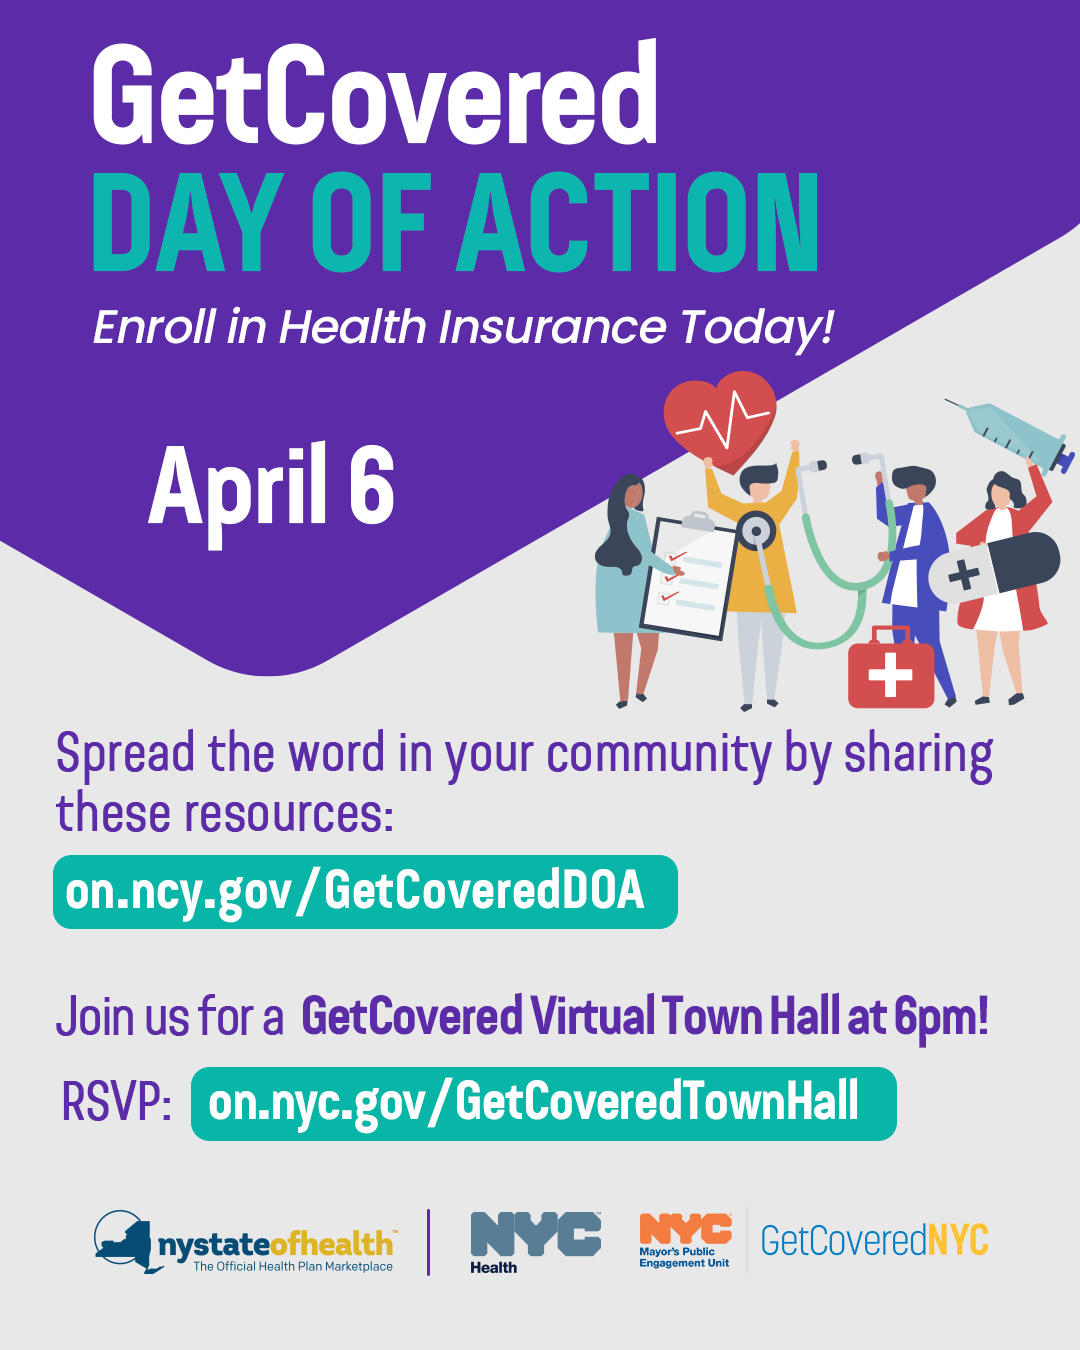 Get Covered Day of Action, enroll in health insurance today! April 6. Spread the word in your community and join our virtual Town Hall.